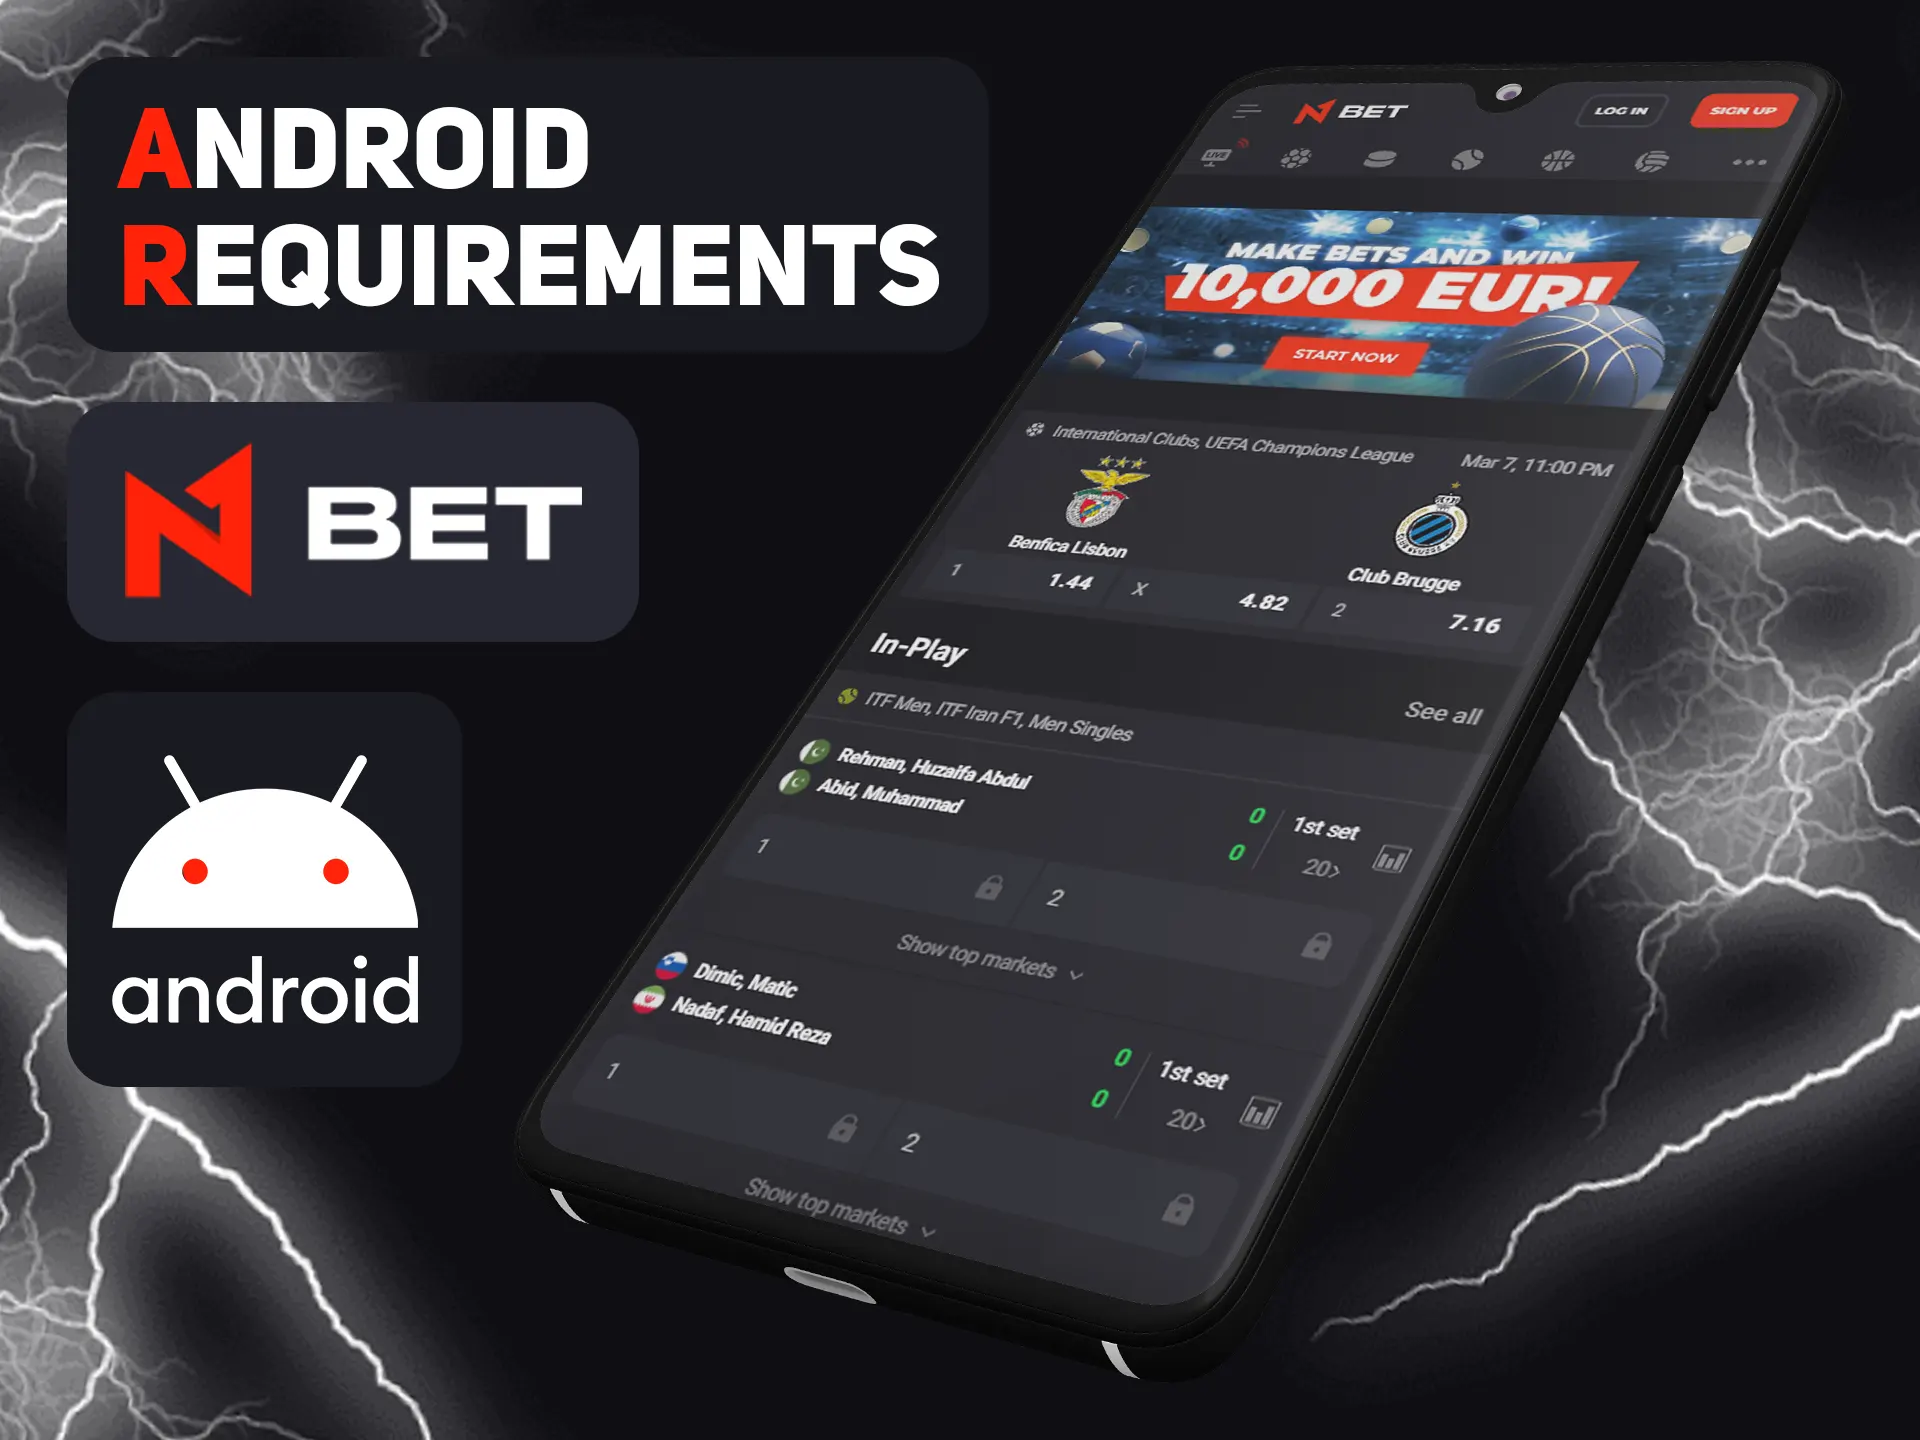 Check your Android device for running N1bet app.